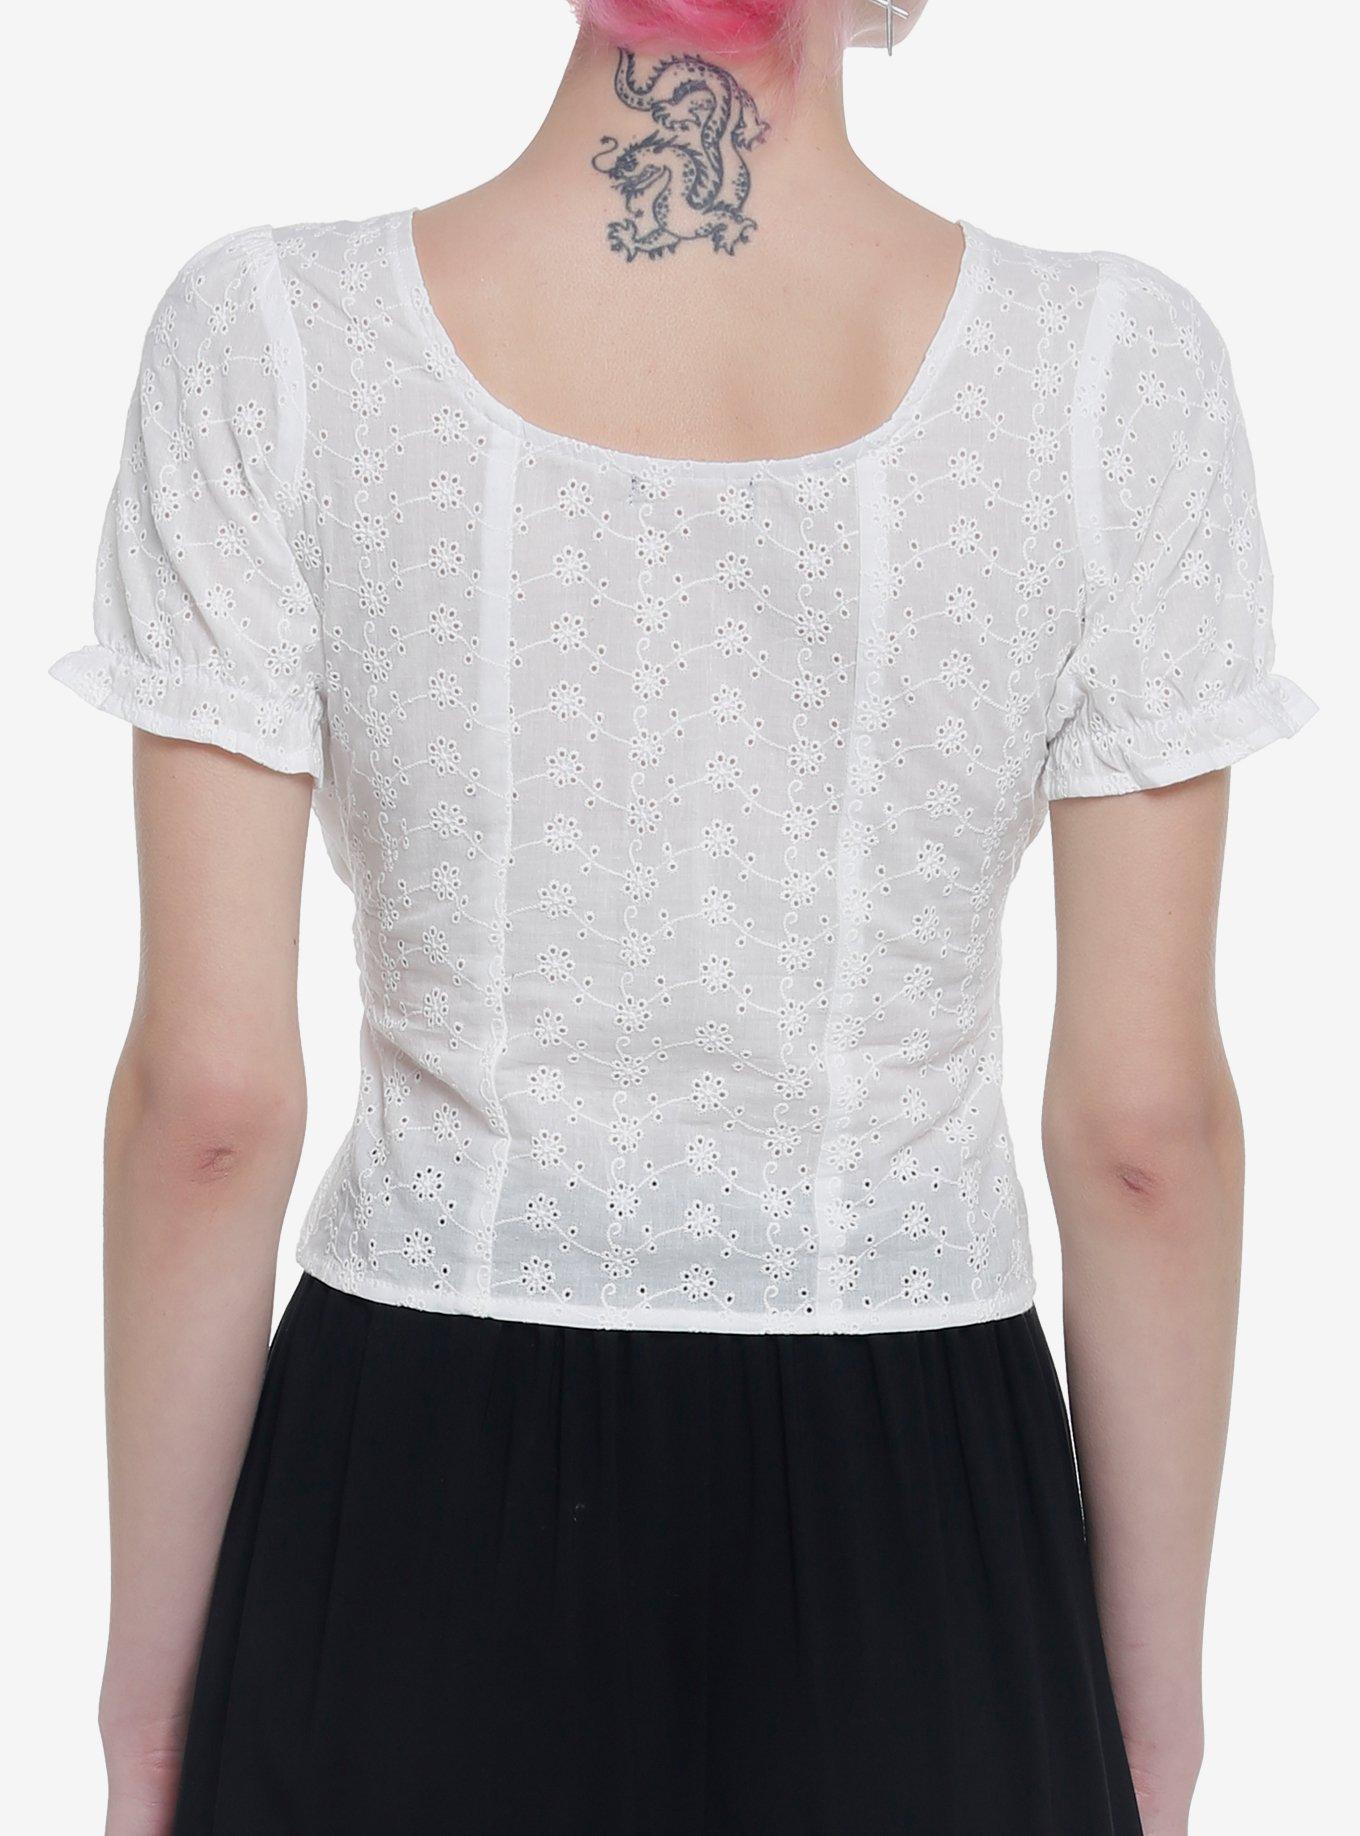 White Floral Lace-Up Girls Crop Top, WHITE, alternate